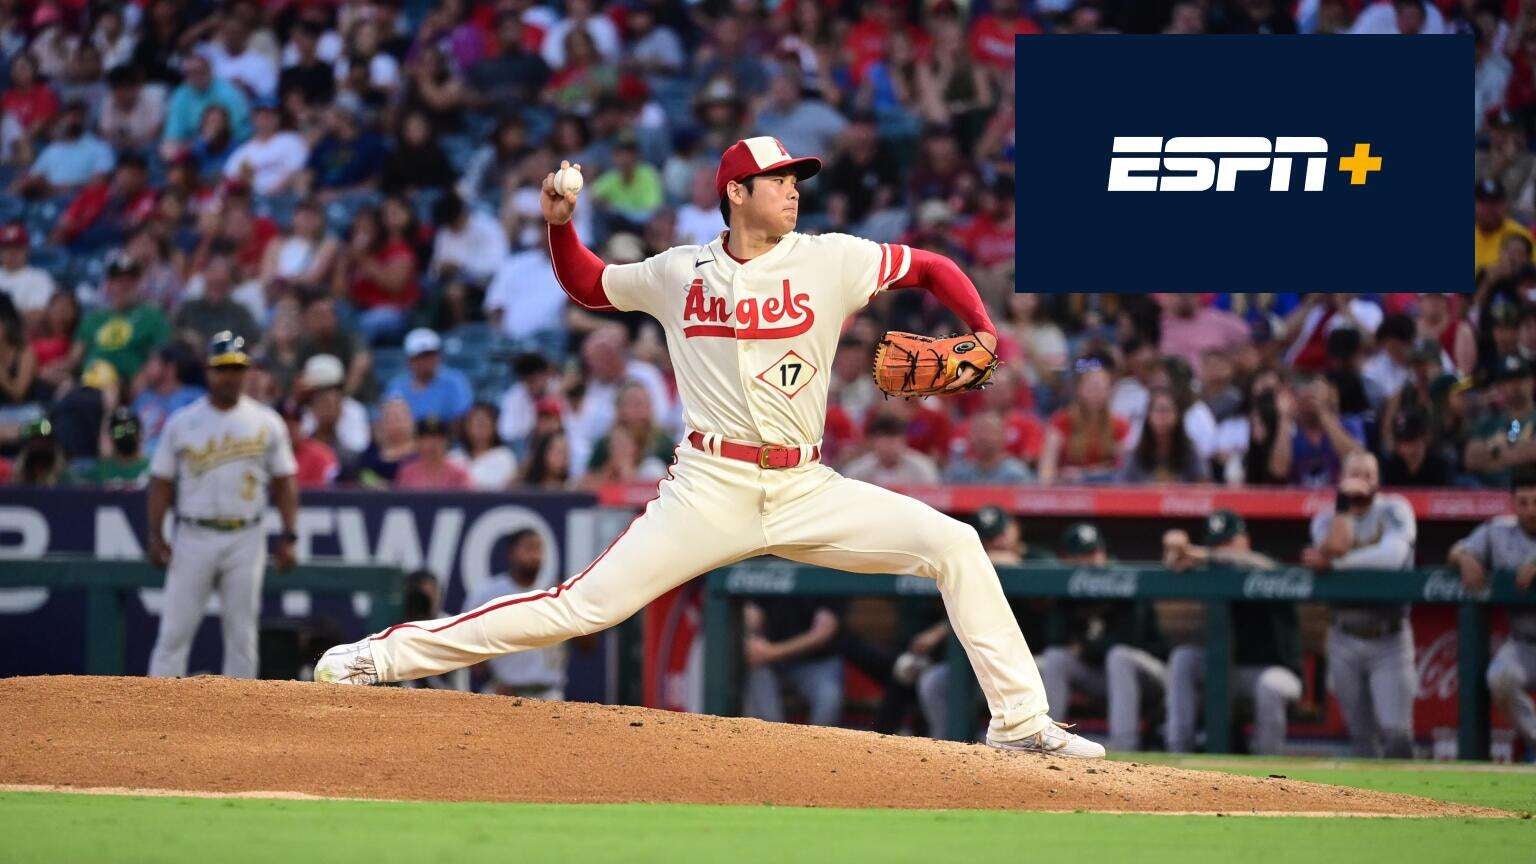 ESPN+ Reveals Major League Baseball Streaming Schedule for Month of